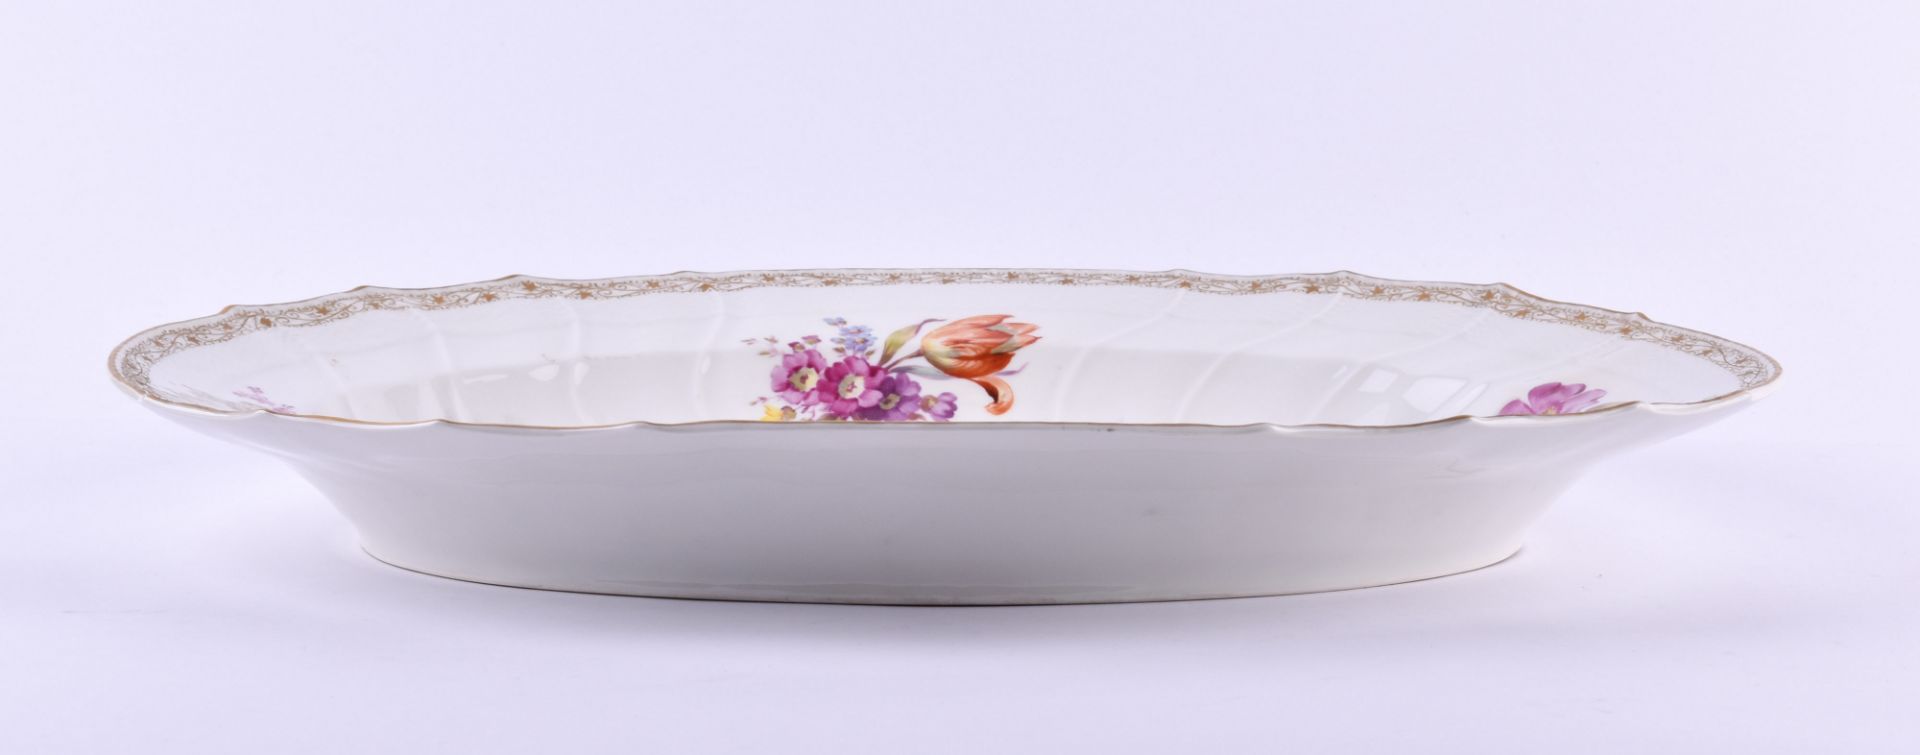 Large meat platter KPM Berlin Rocaille around 1850 - Image 3 of 6